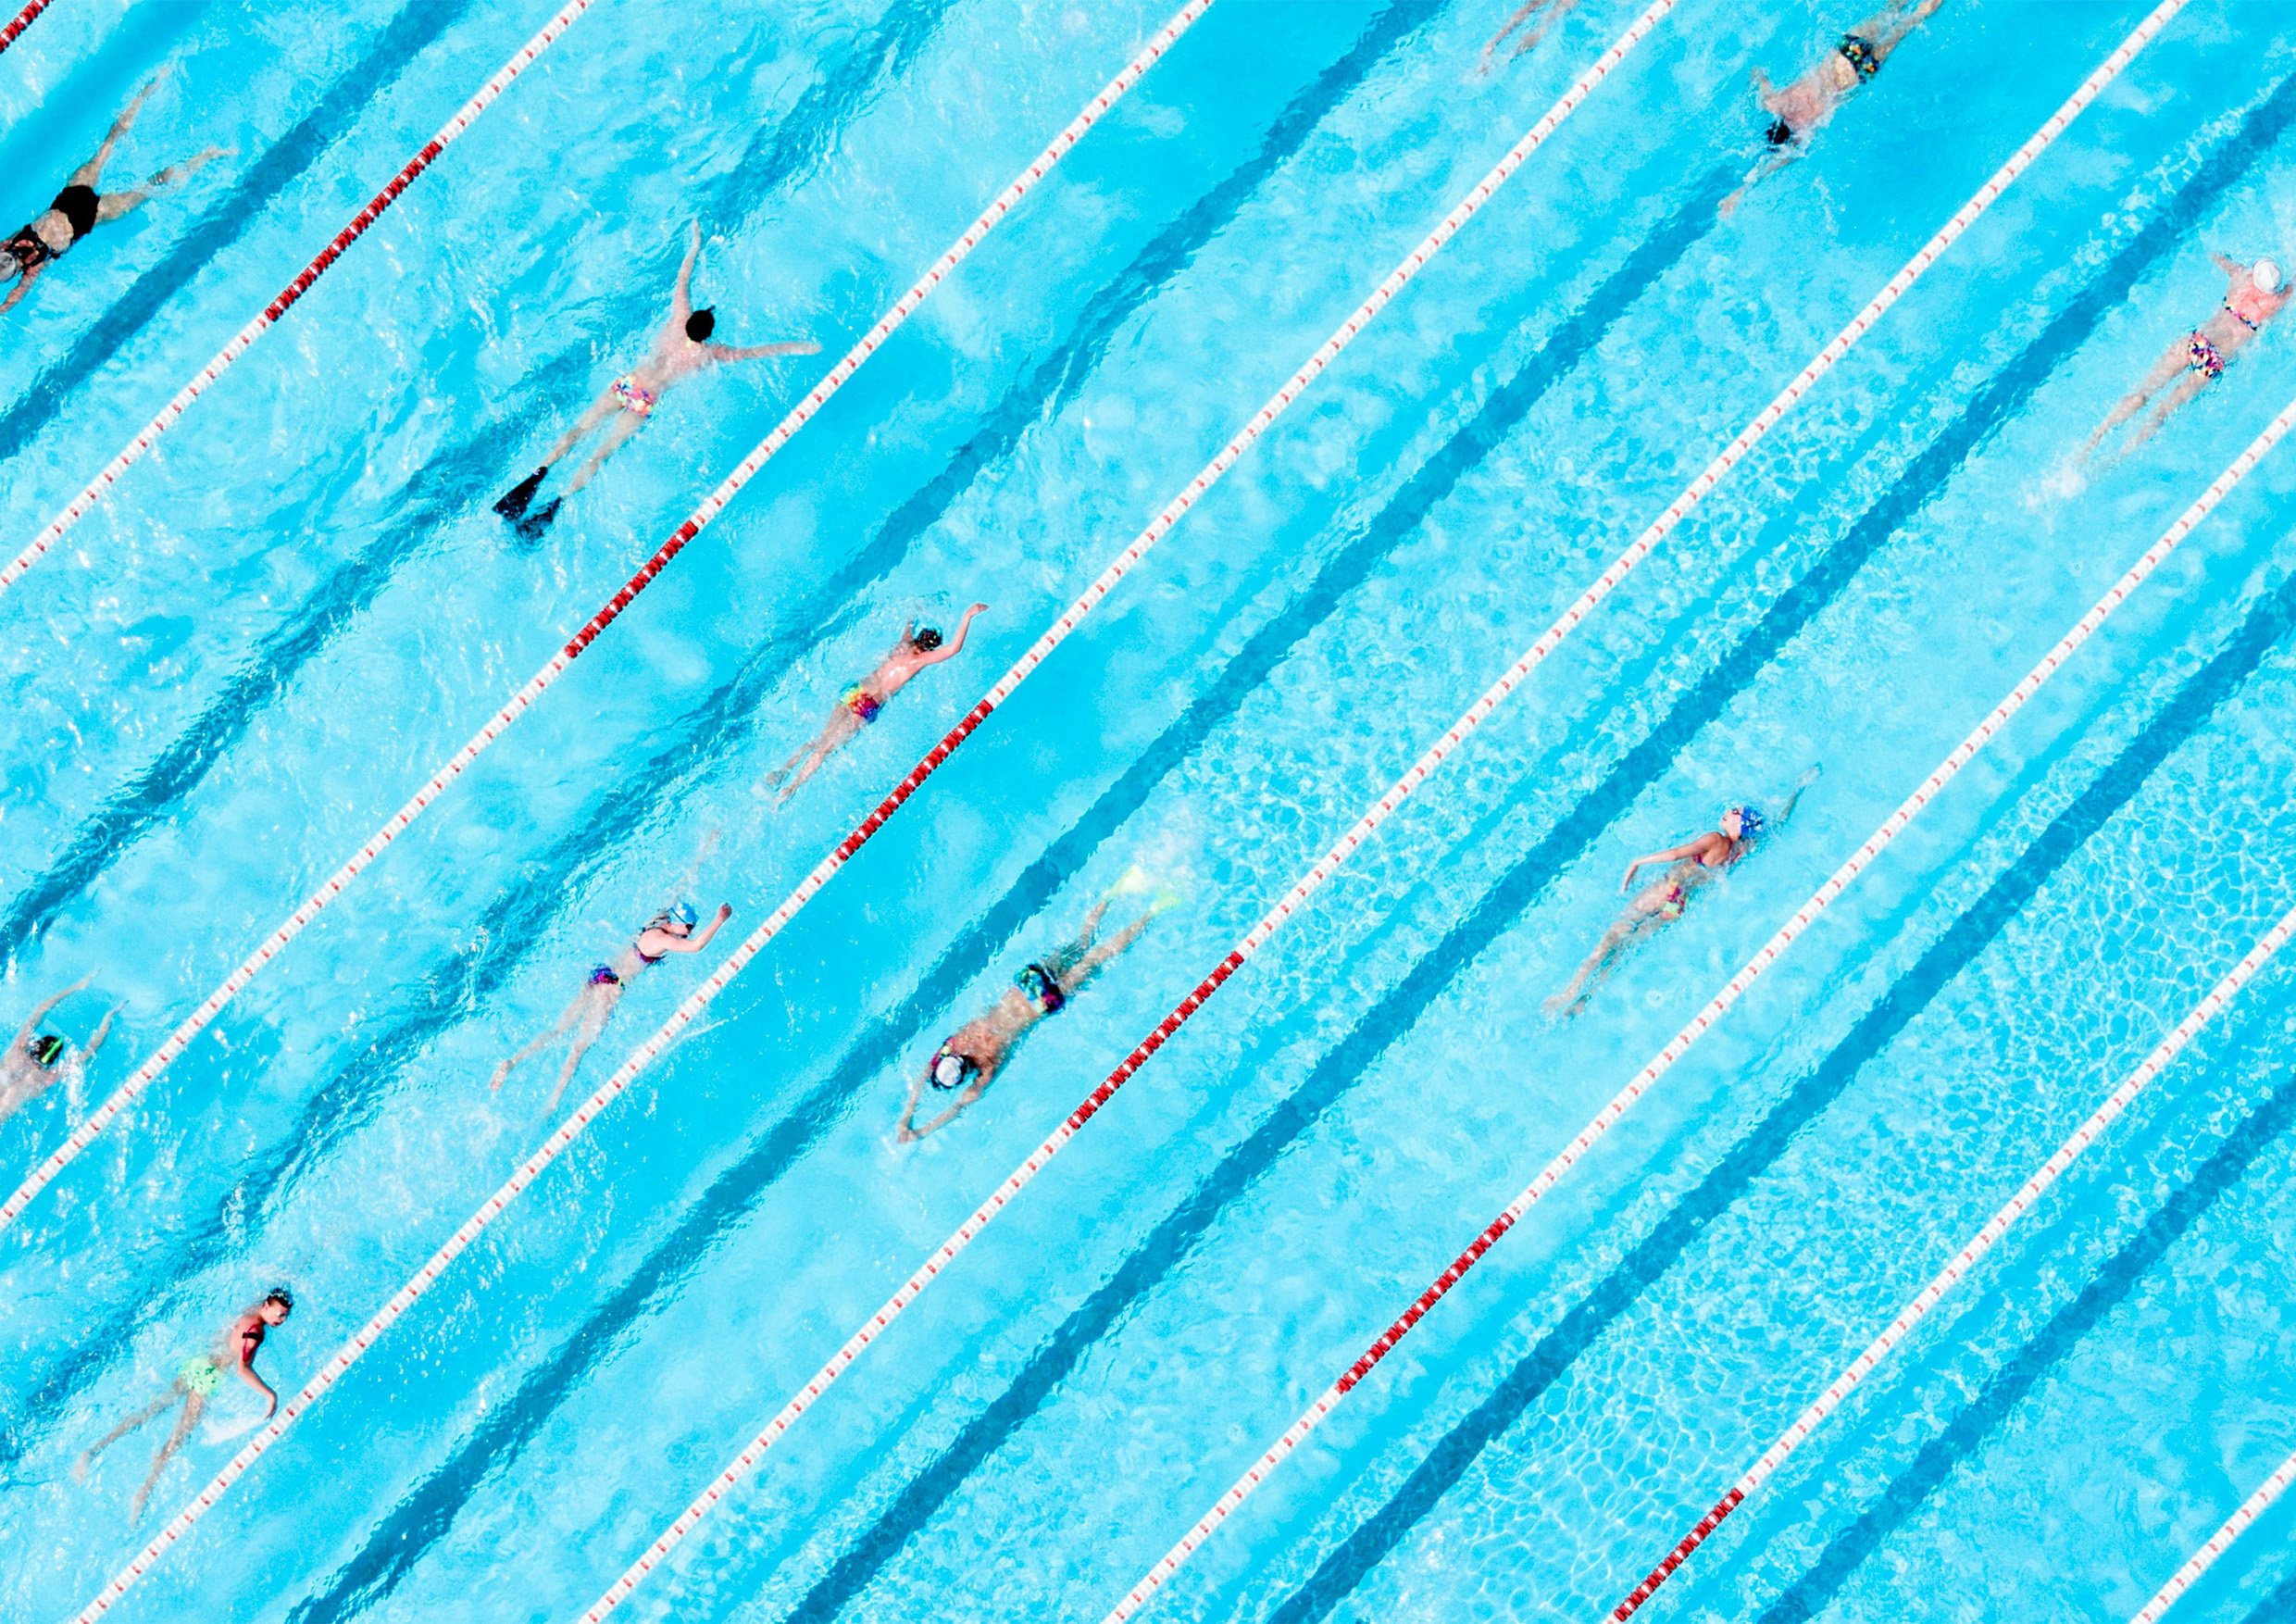 Swimmers in lanes